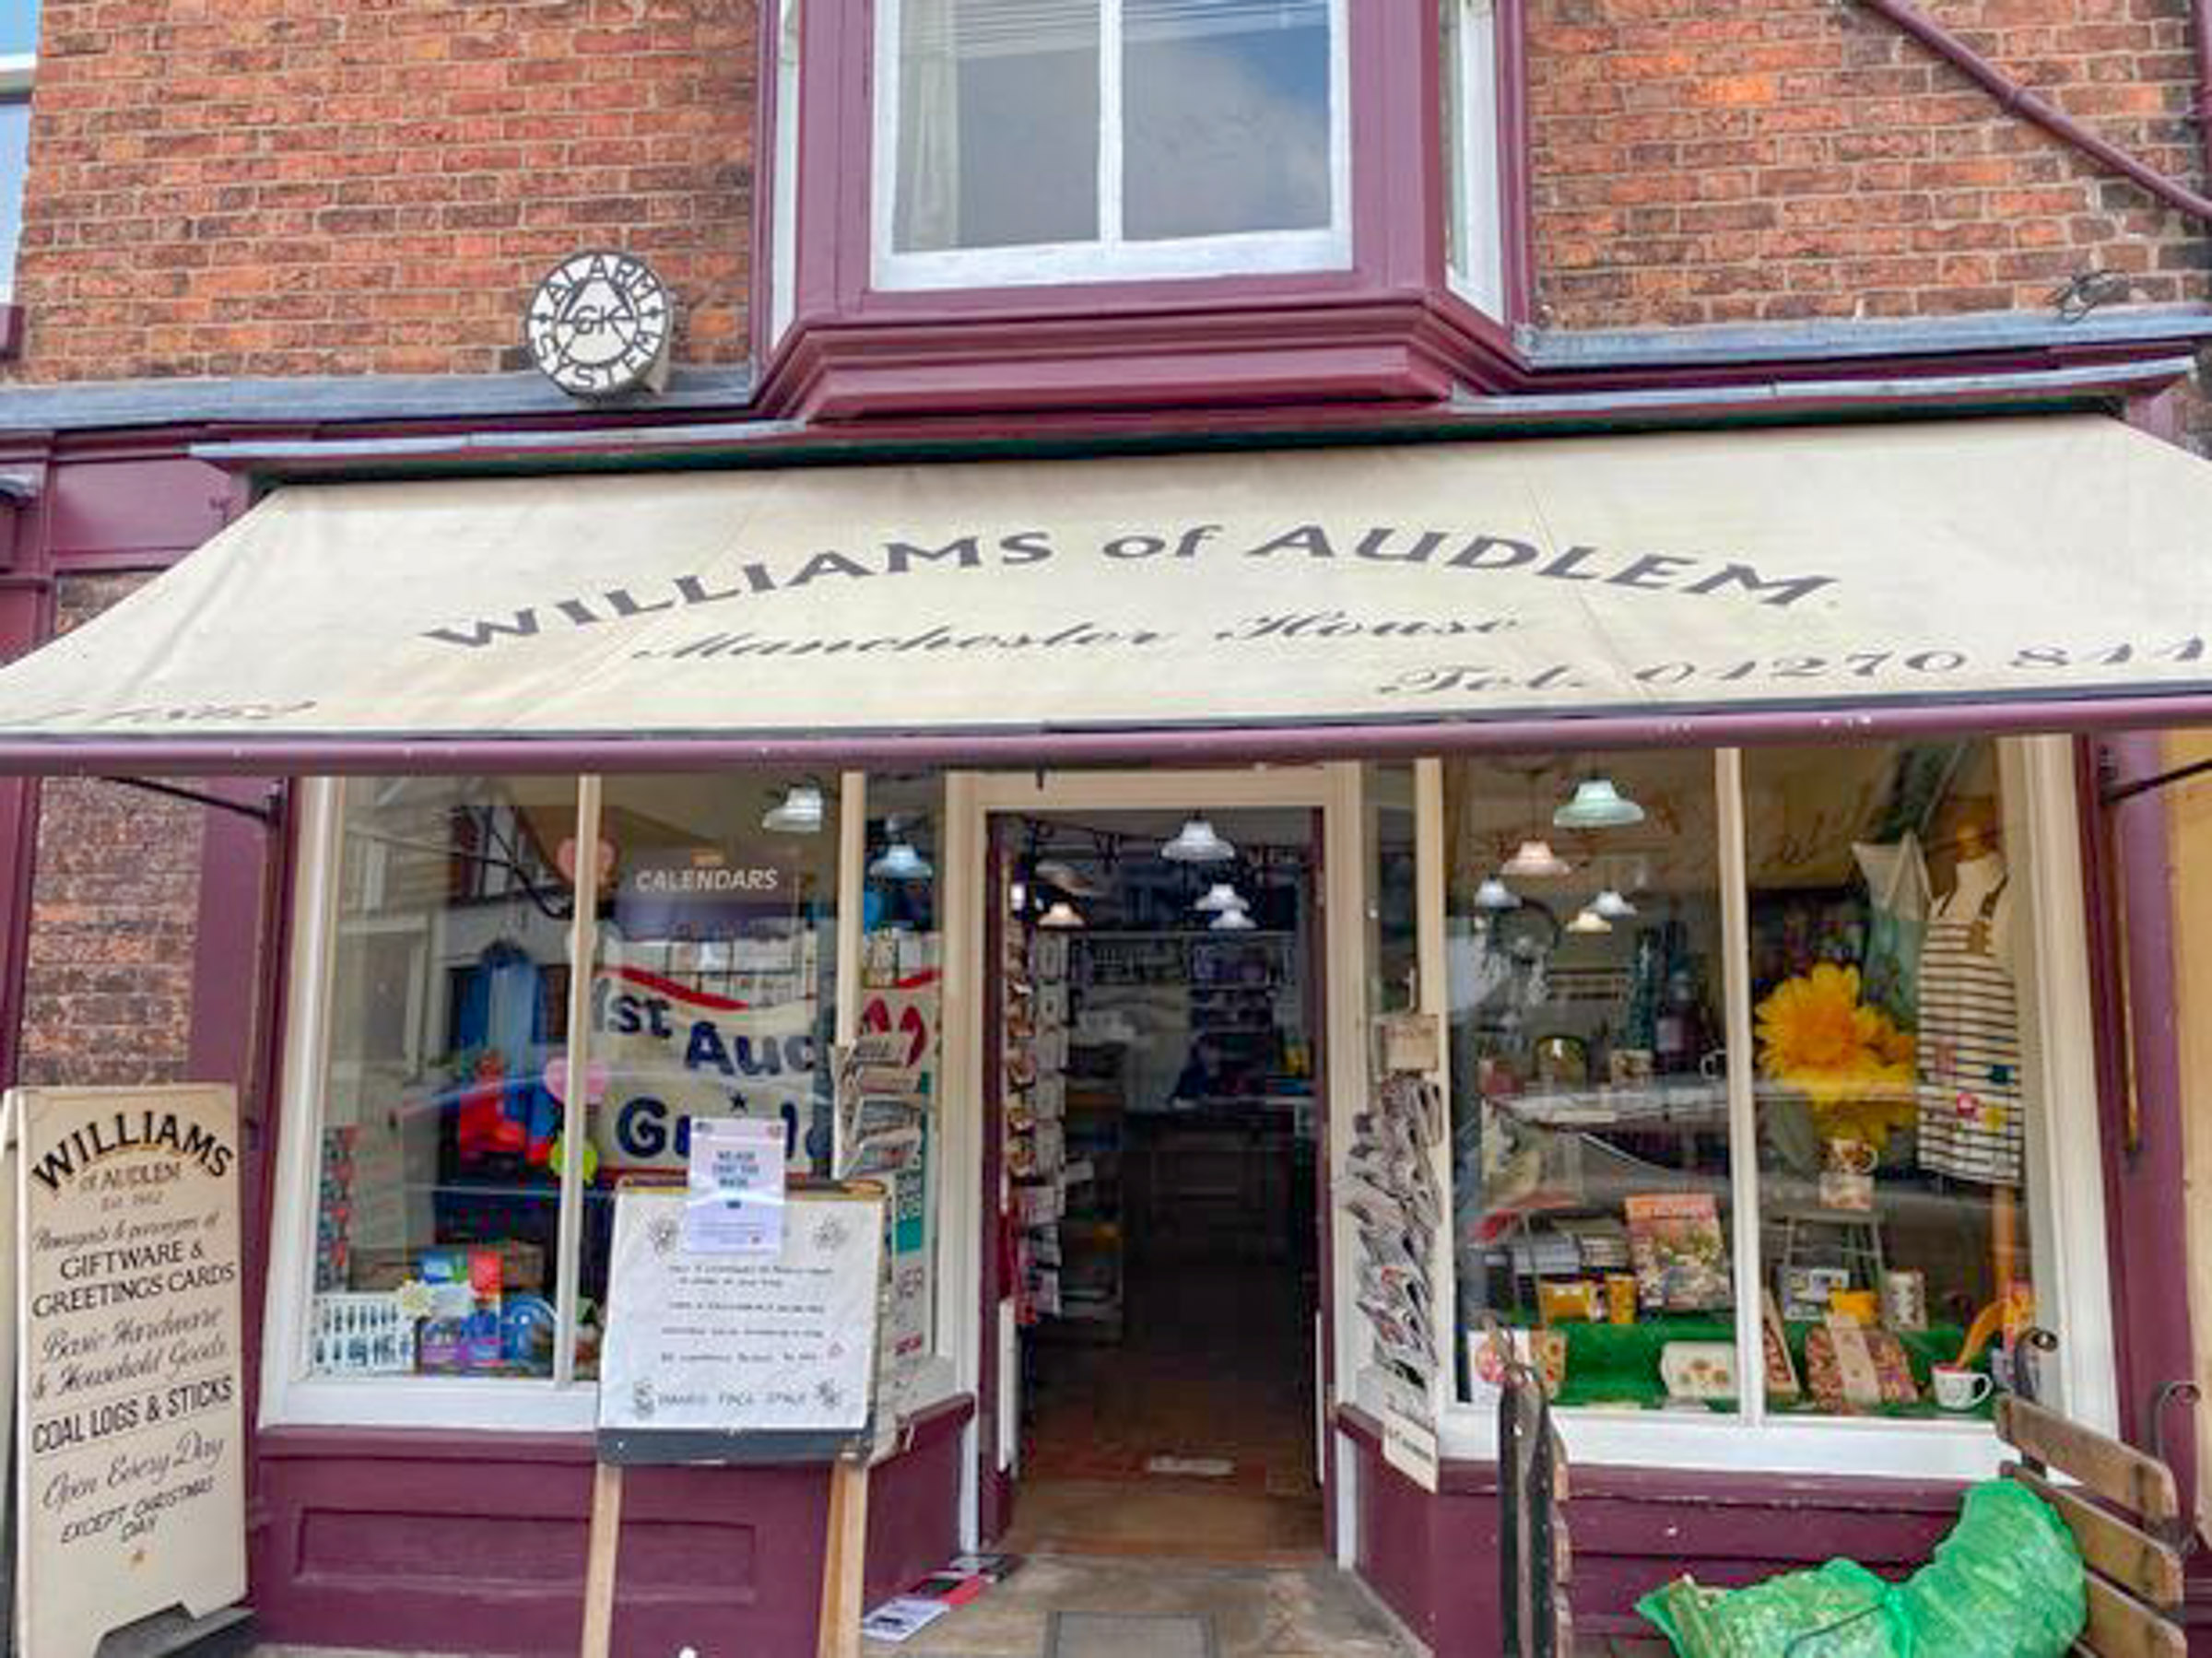 Williams of Audlem Mural - These last few shots show the outside of the vintage shop, and the picturesque town centre of Audlem